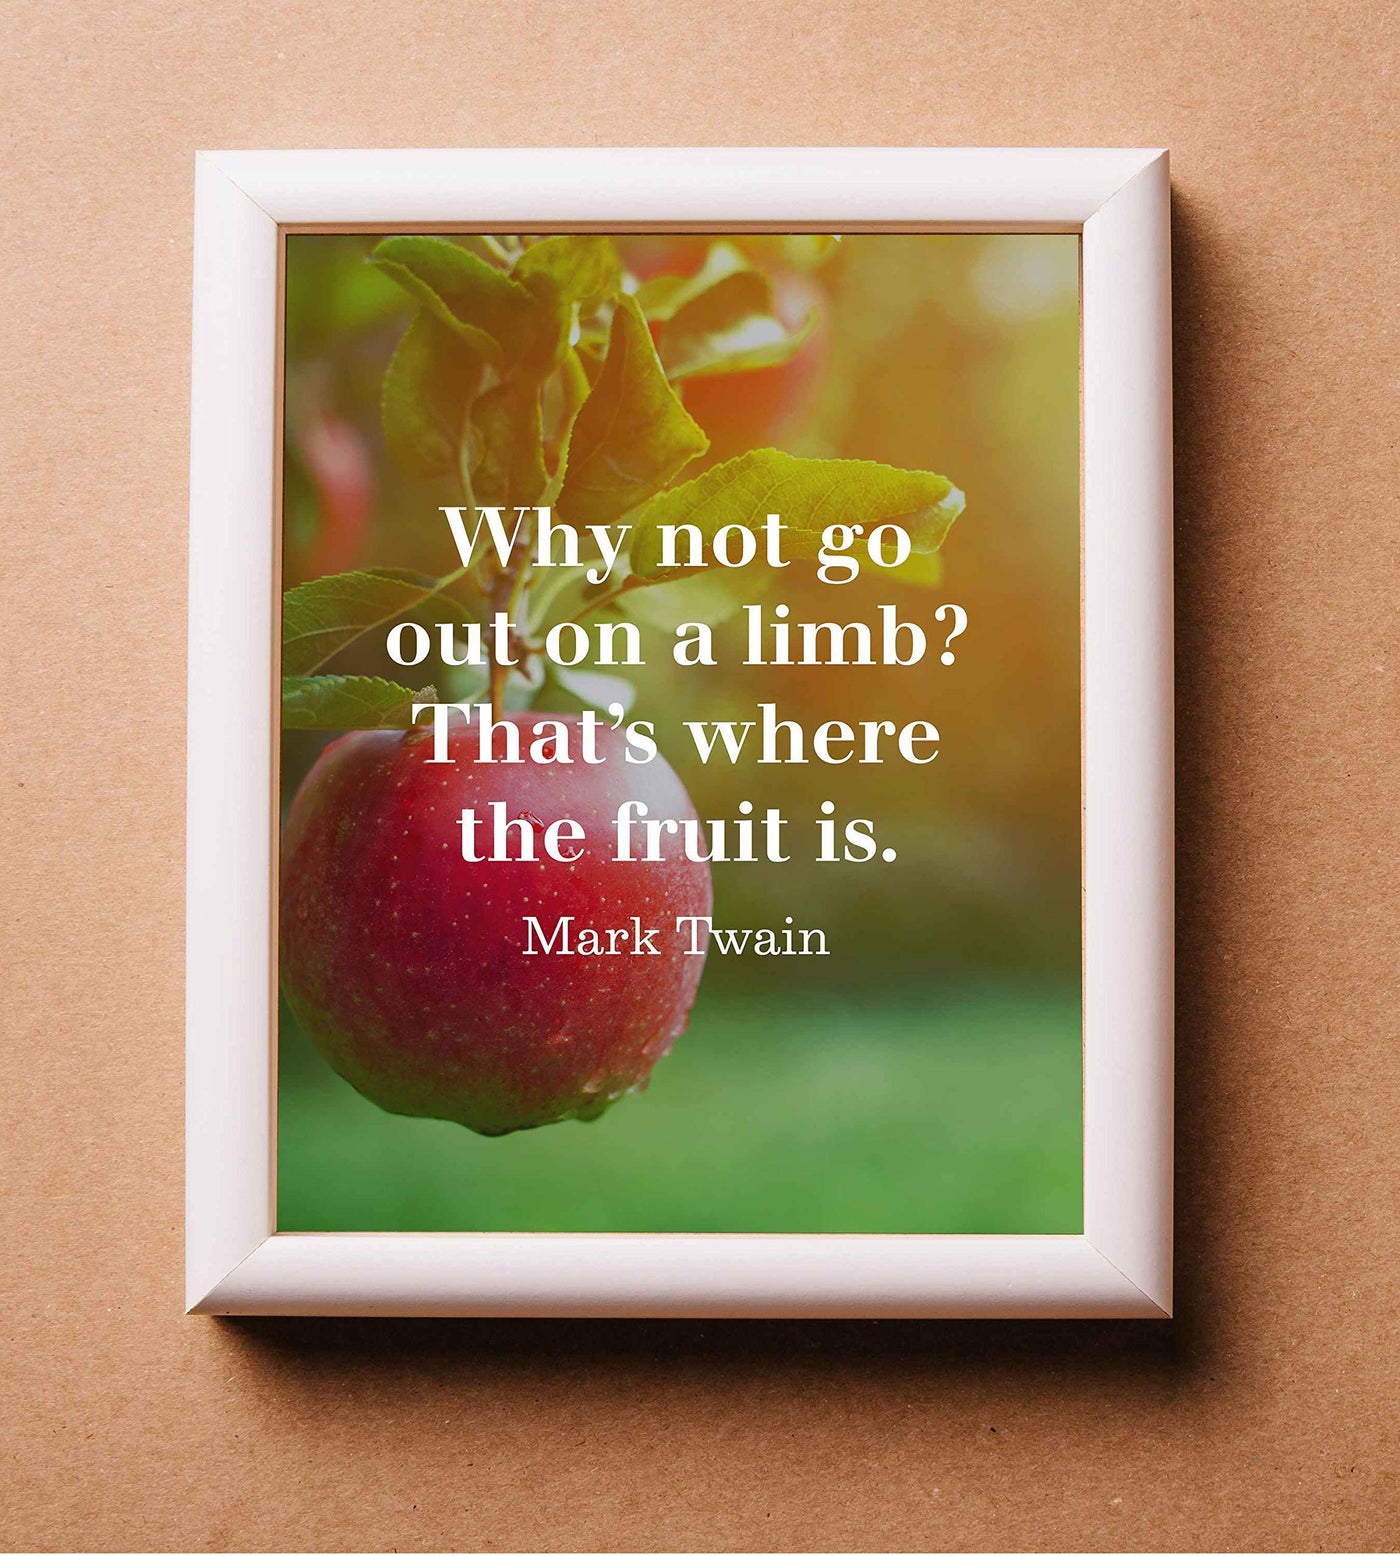 Mark Twain-"Why Not Go Out On A Limb-Where Fruit Is"-Motivational Quotes Wall Art-8 x 10" Typographic Poster Print-Ready to Frame. Home-Office-Classroom-Dorm Decor. Great Inspirational Gift!